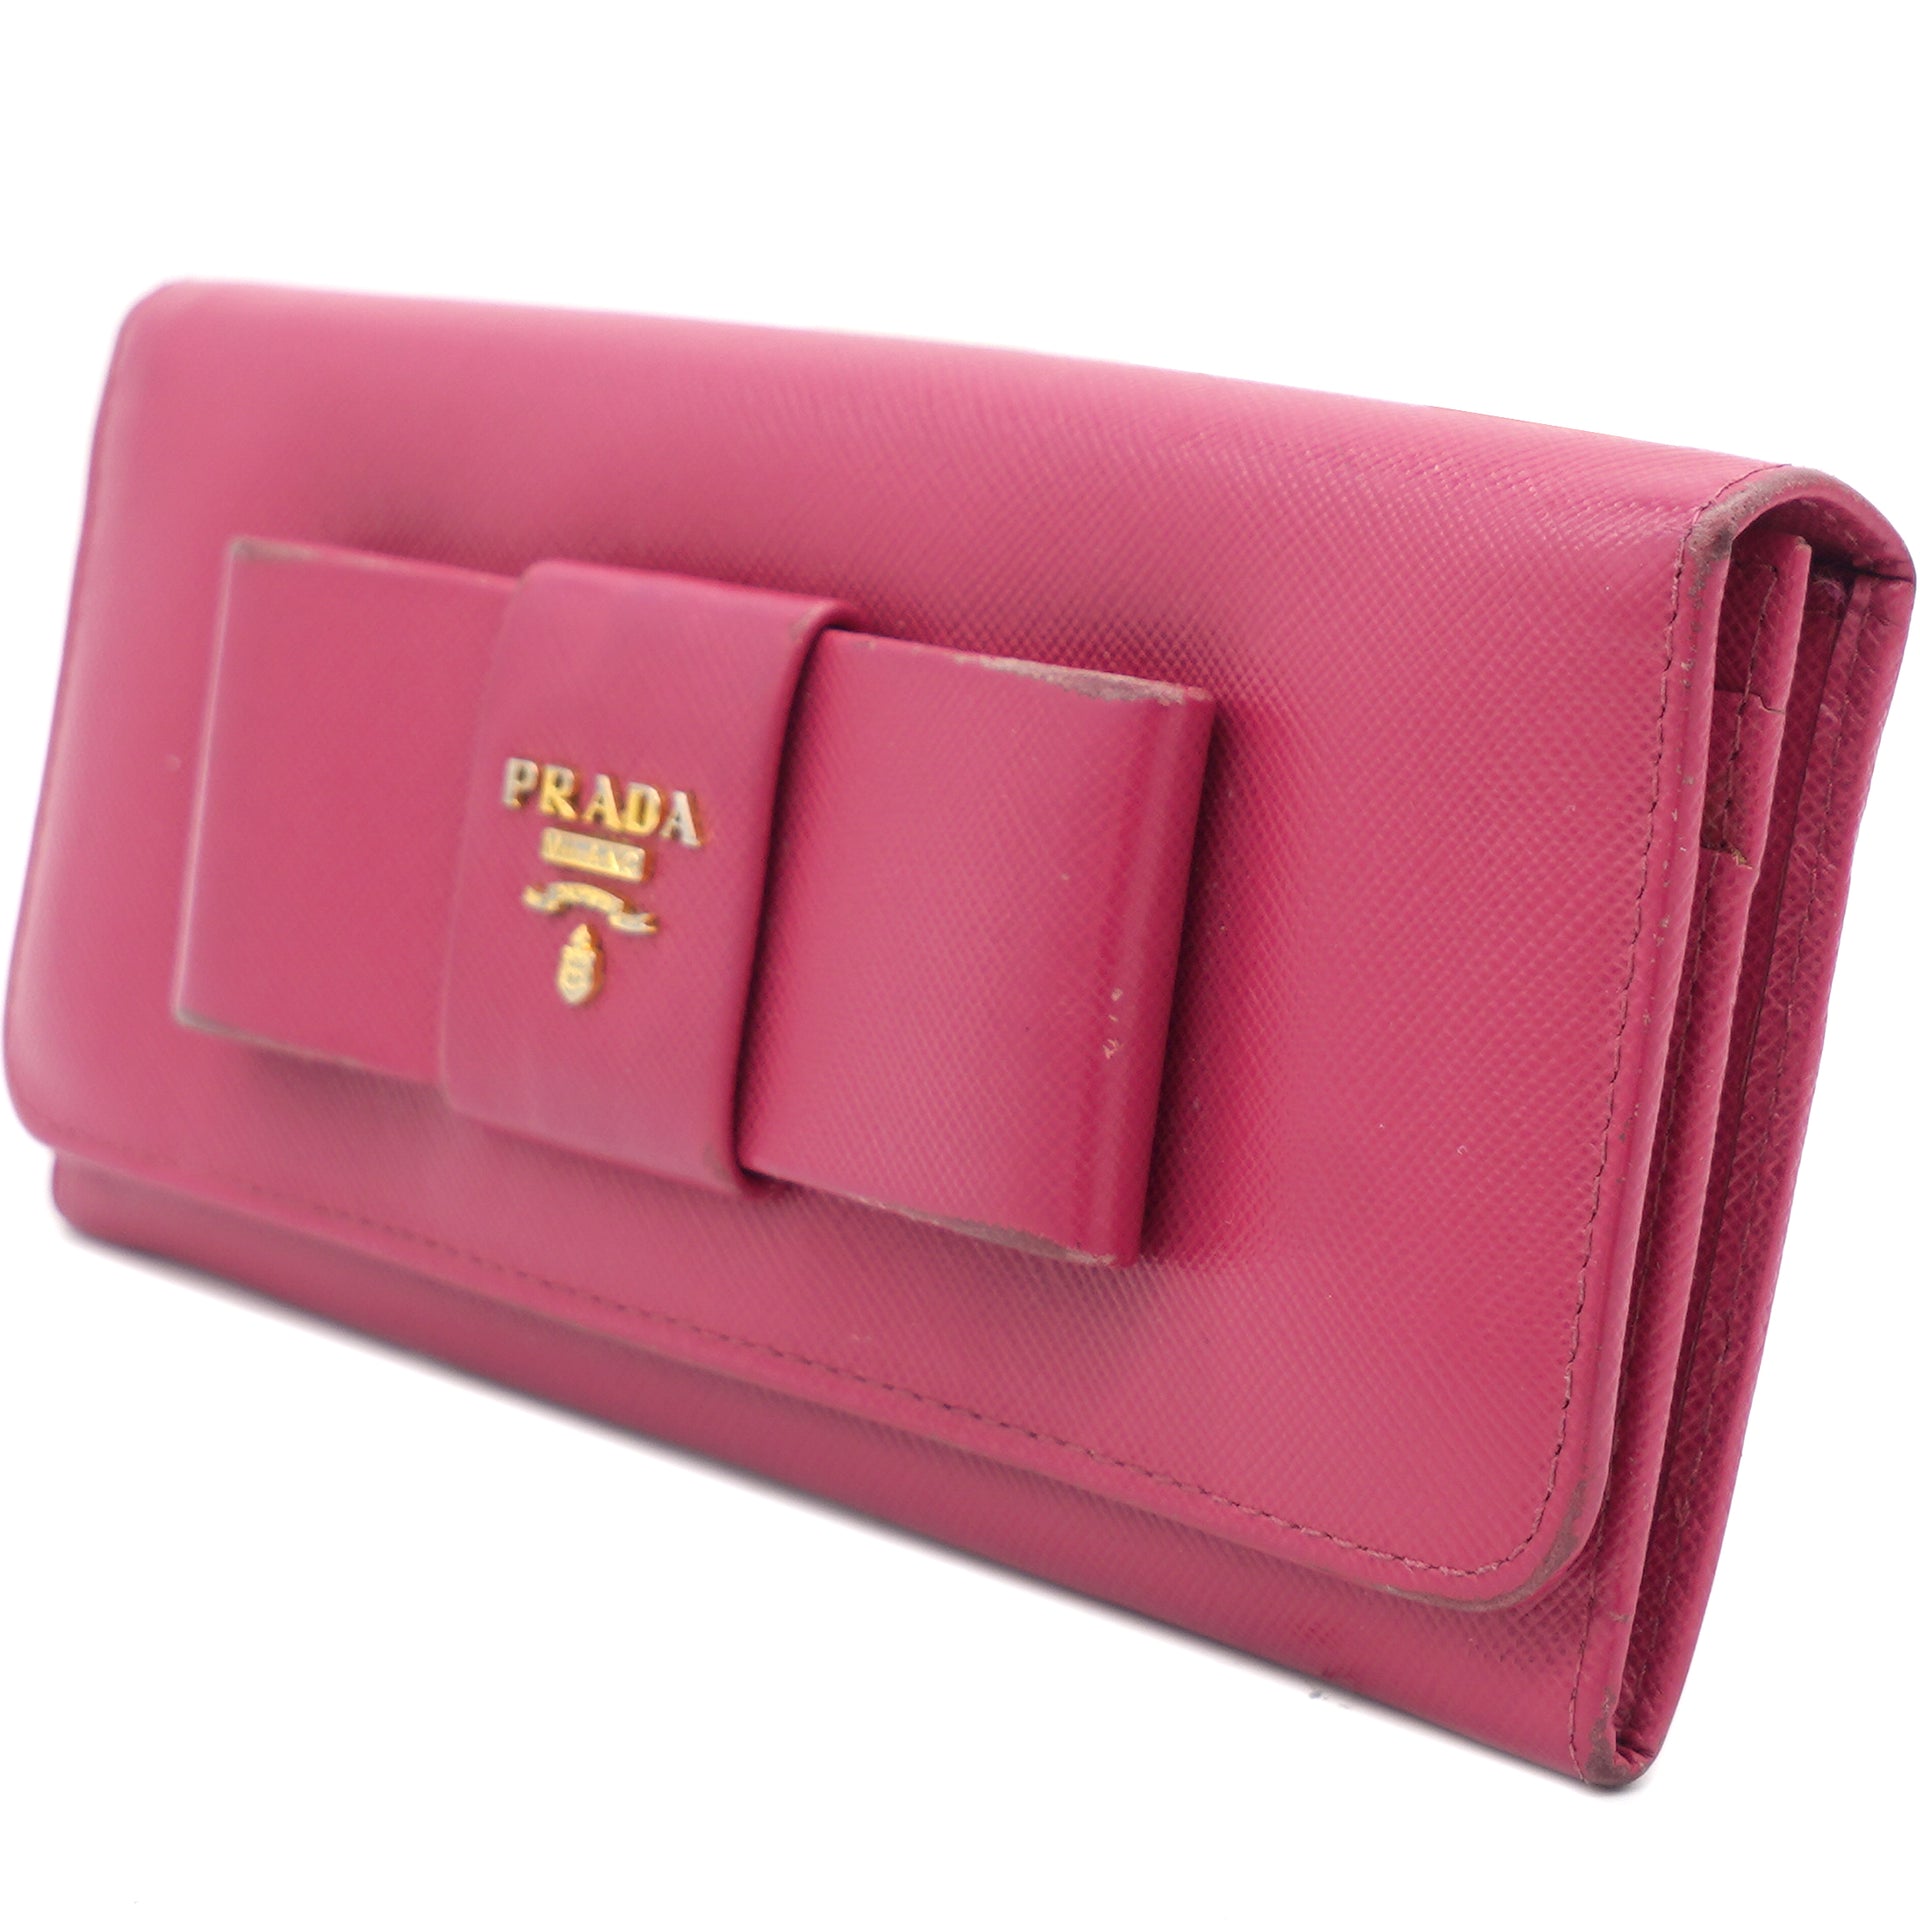 Prada Pink Saffiano Leather Bow Flap Wallet